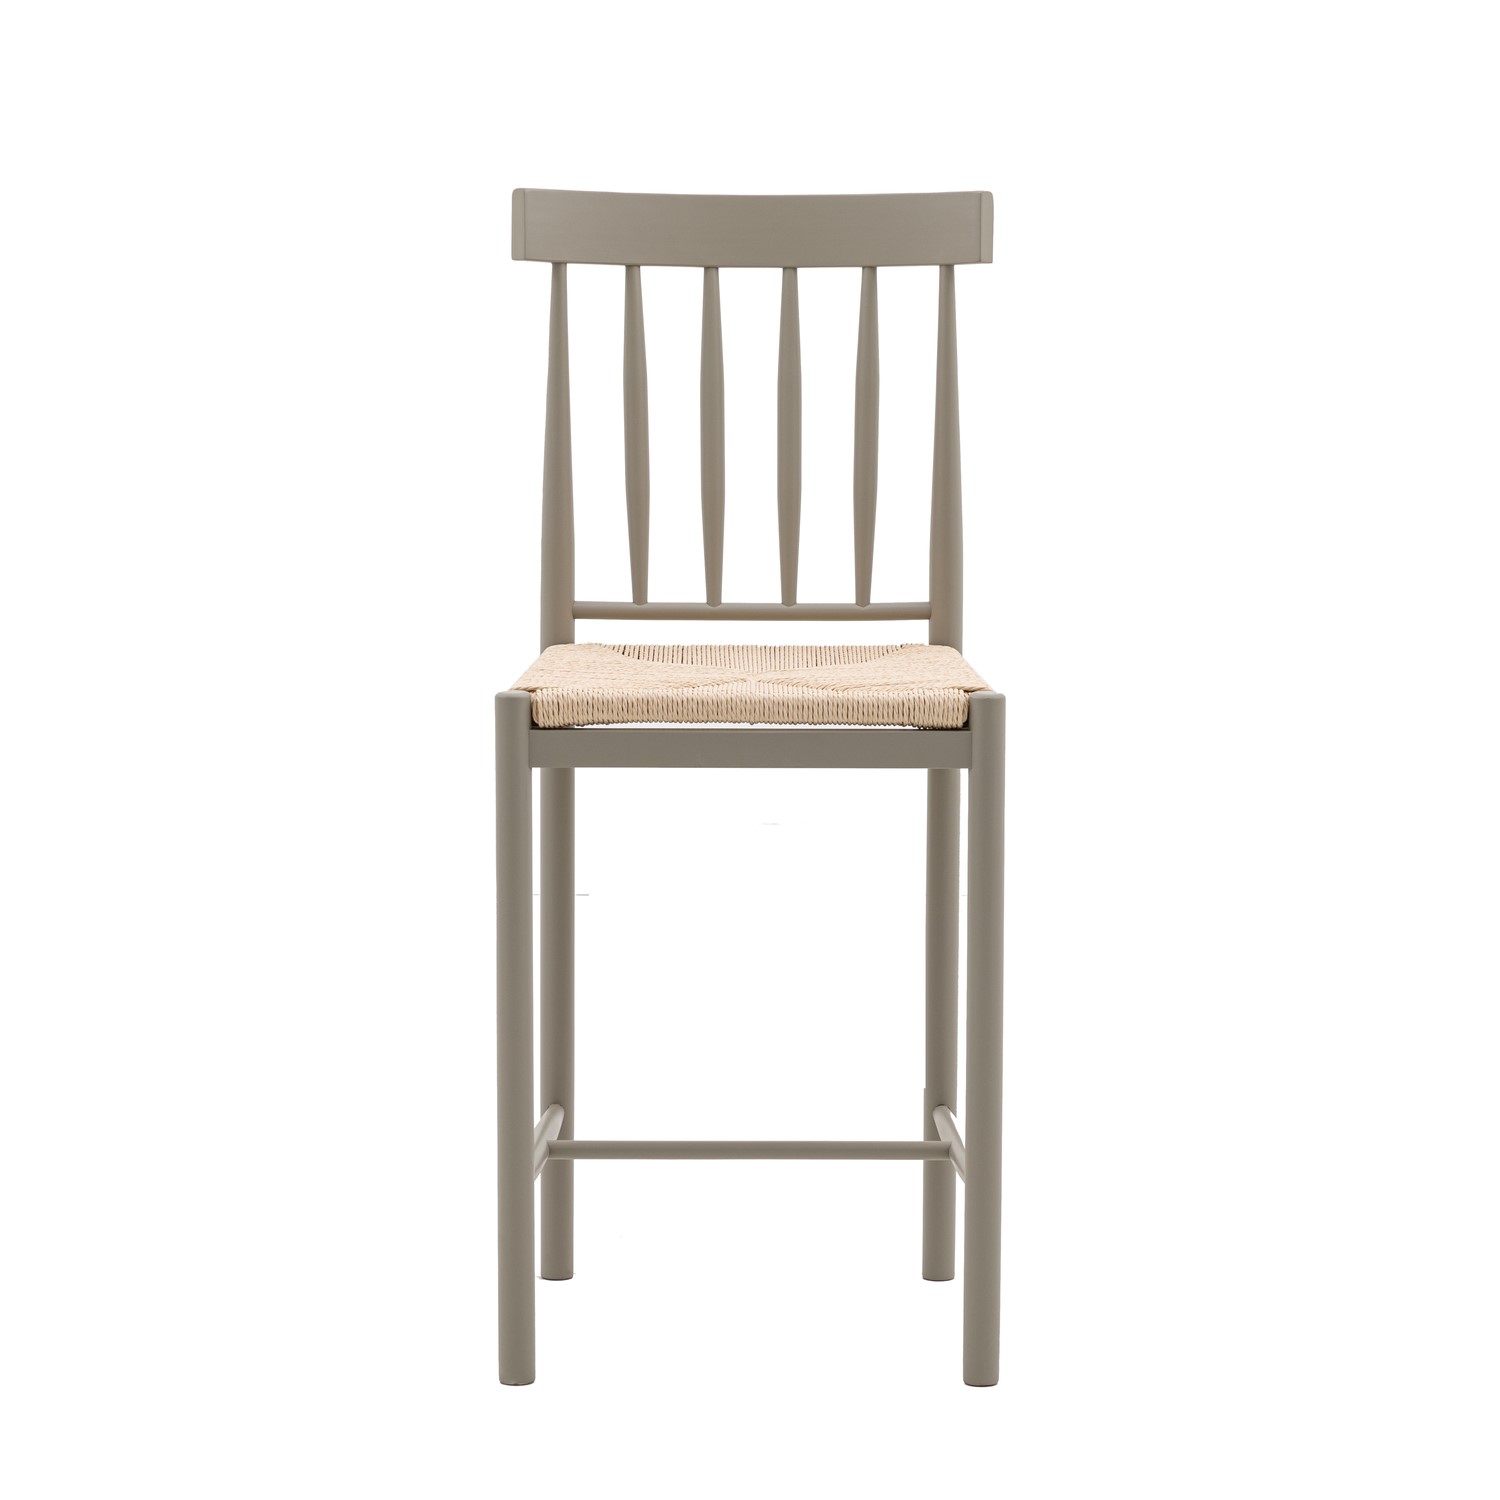 Read more about Eton set of 2 solid oak bar stools with woven seats sage green caspian house